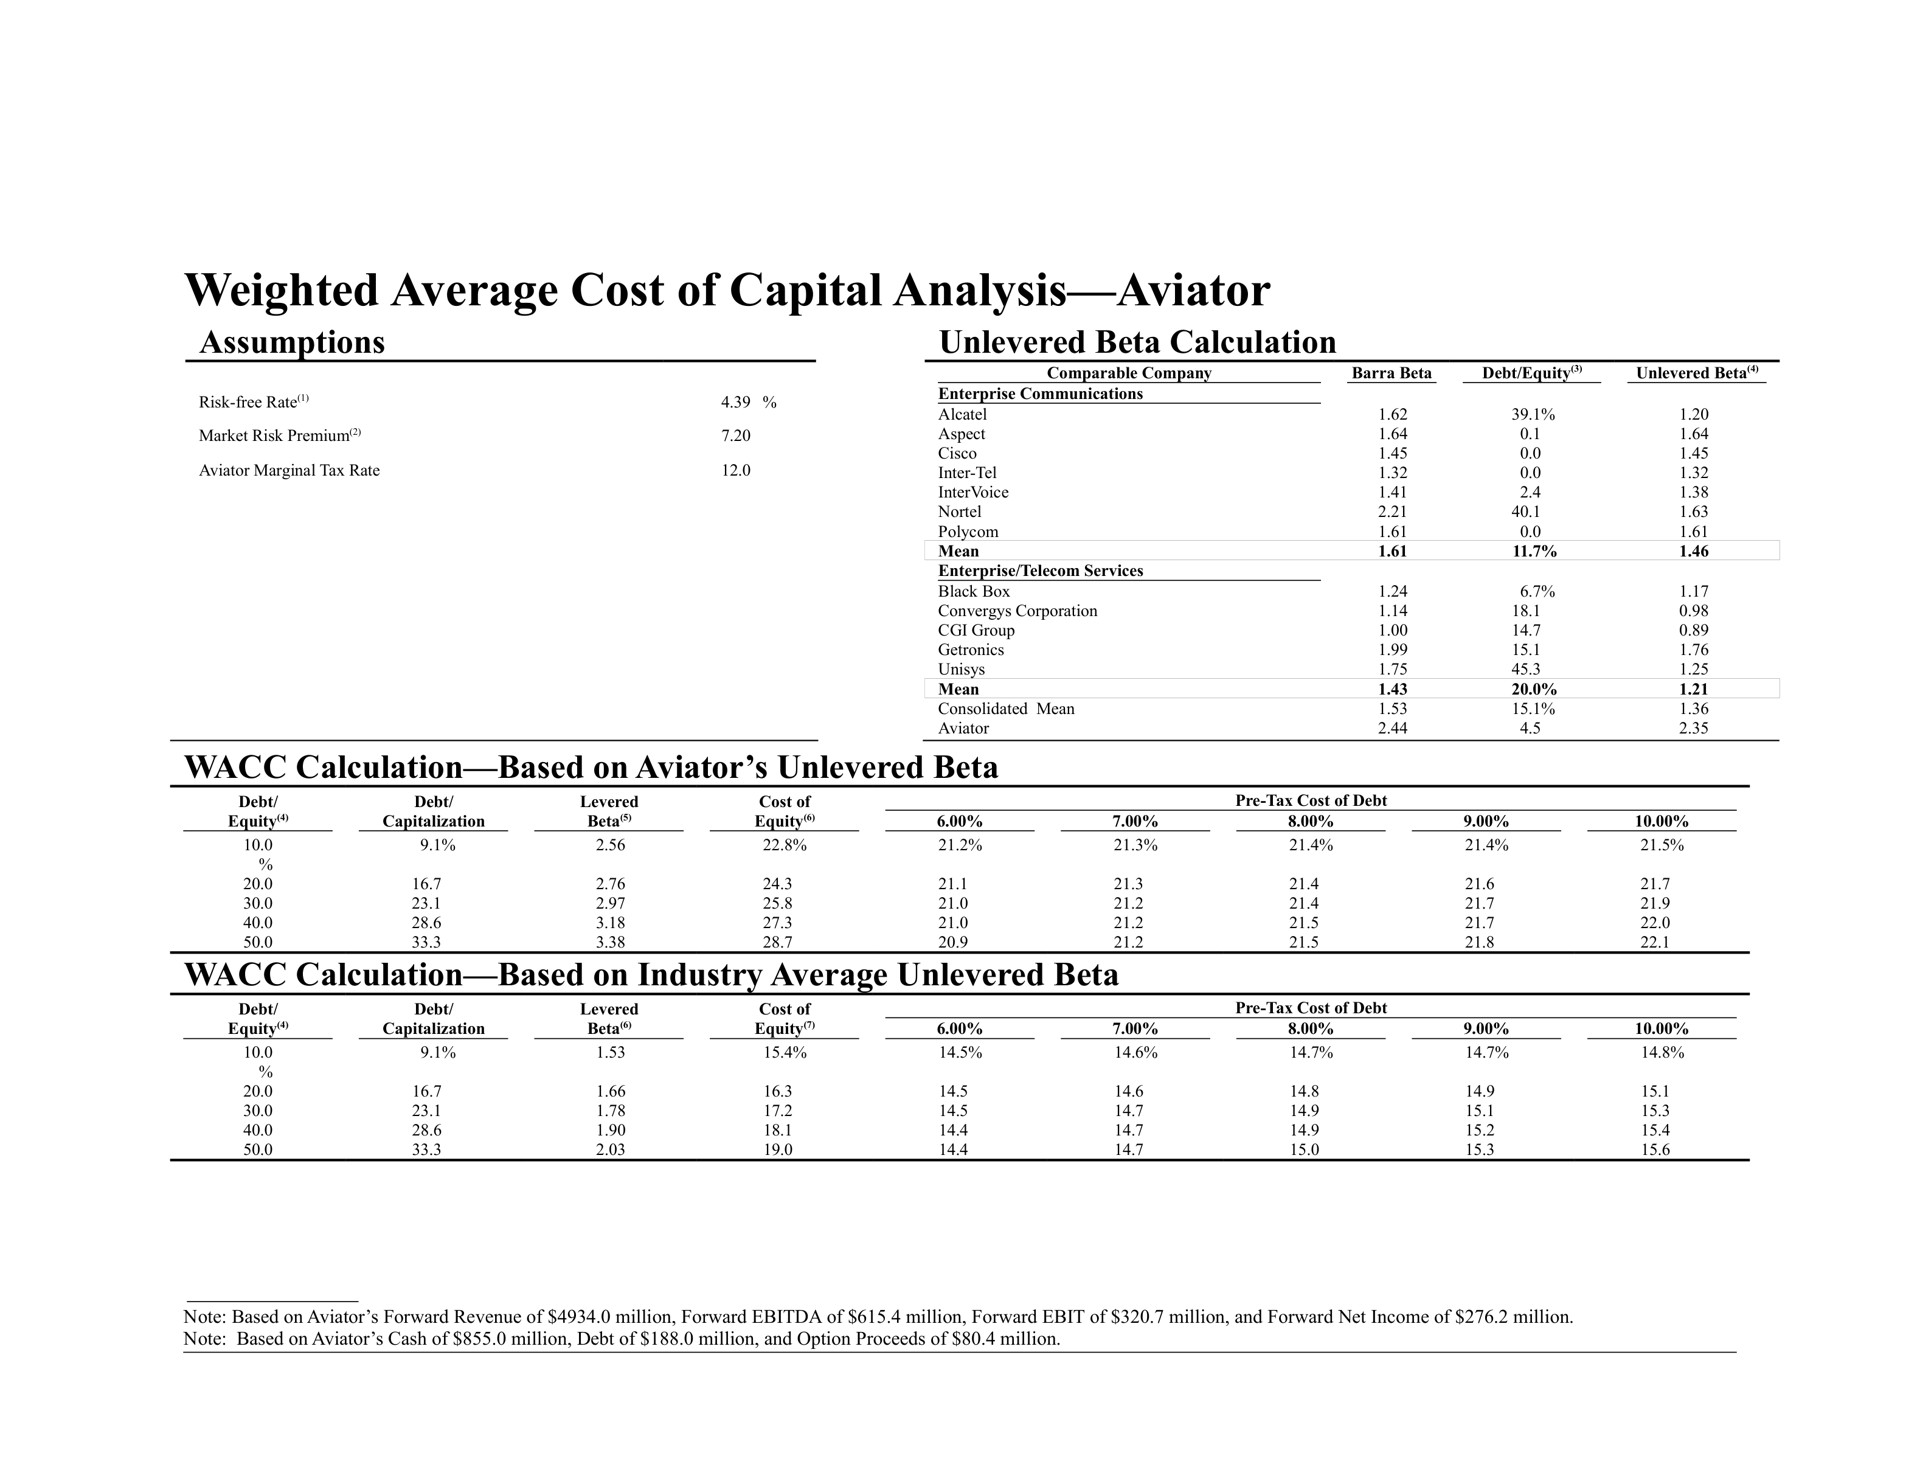 weighted average cost of capital analysis aviator assumptions beta calculation calculation based on aviator beta calculation based on industry average beta | Bear Stearns